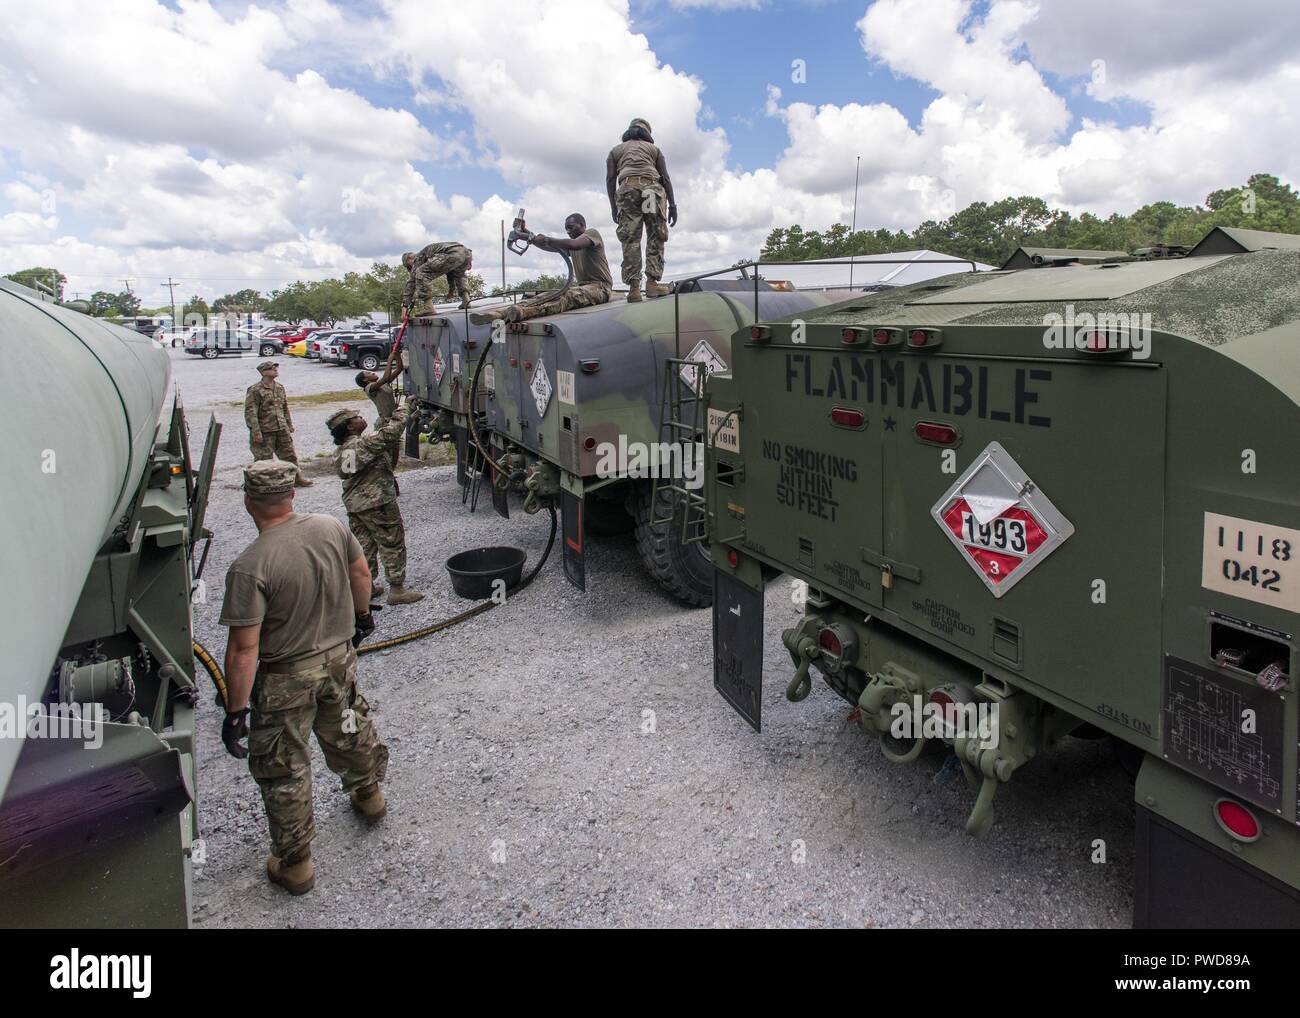 South Carolina National Guard Soldiers from the 118th Forward Support Company transfer bulk diesel fuel into M987 HEMTT fuel tanker trucks for distribution in preparation to support partnered civilian agencies and safeguard the citizens of the state in advance of Hurricane Florence, in North Charleston, South Carolina, September 10, 2018, September 10, 2018. Approximately 800 Soldiers and Airmen have been mobilized to prepare, respond and participate in recovery efforts as forecasters project Hurricane Florence will increase in strength with potential to be a Category 4 storm and a projected p Stock Photo